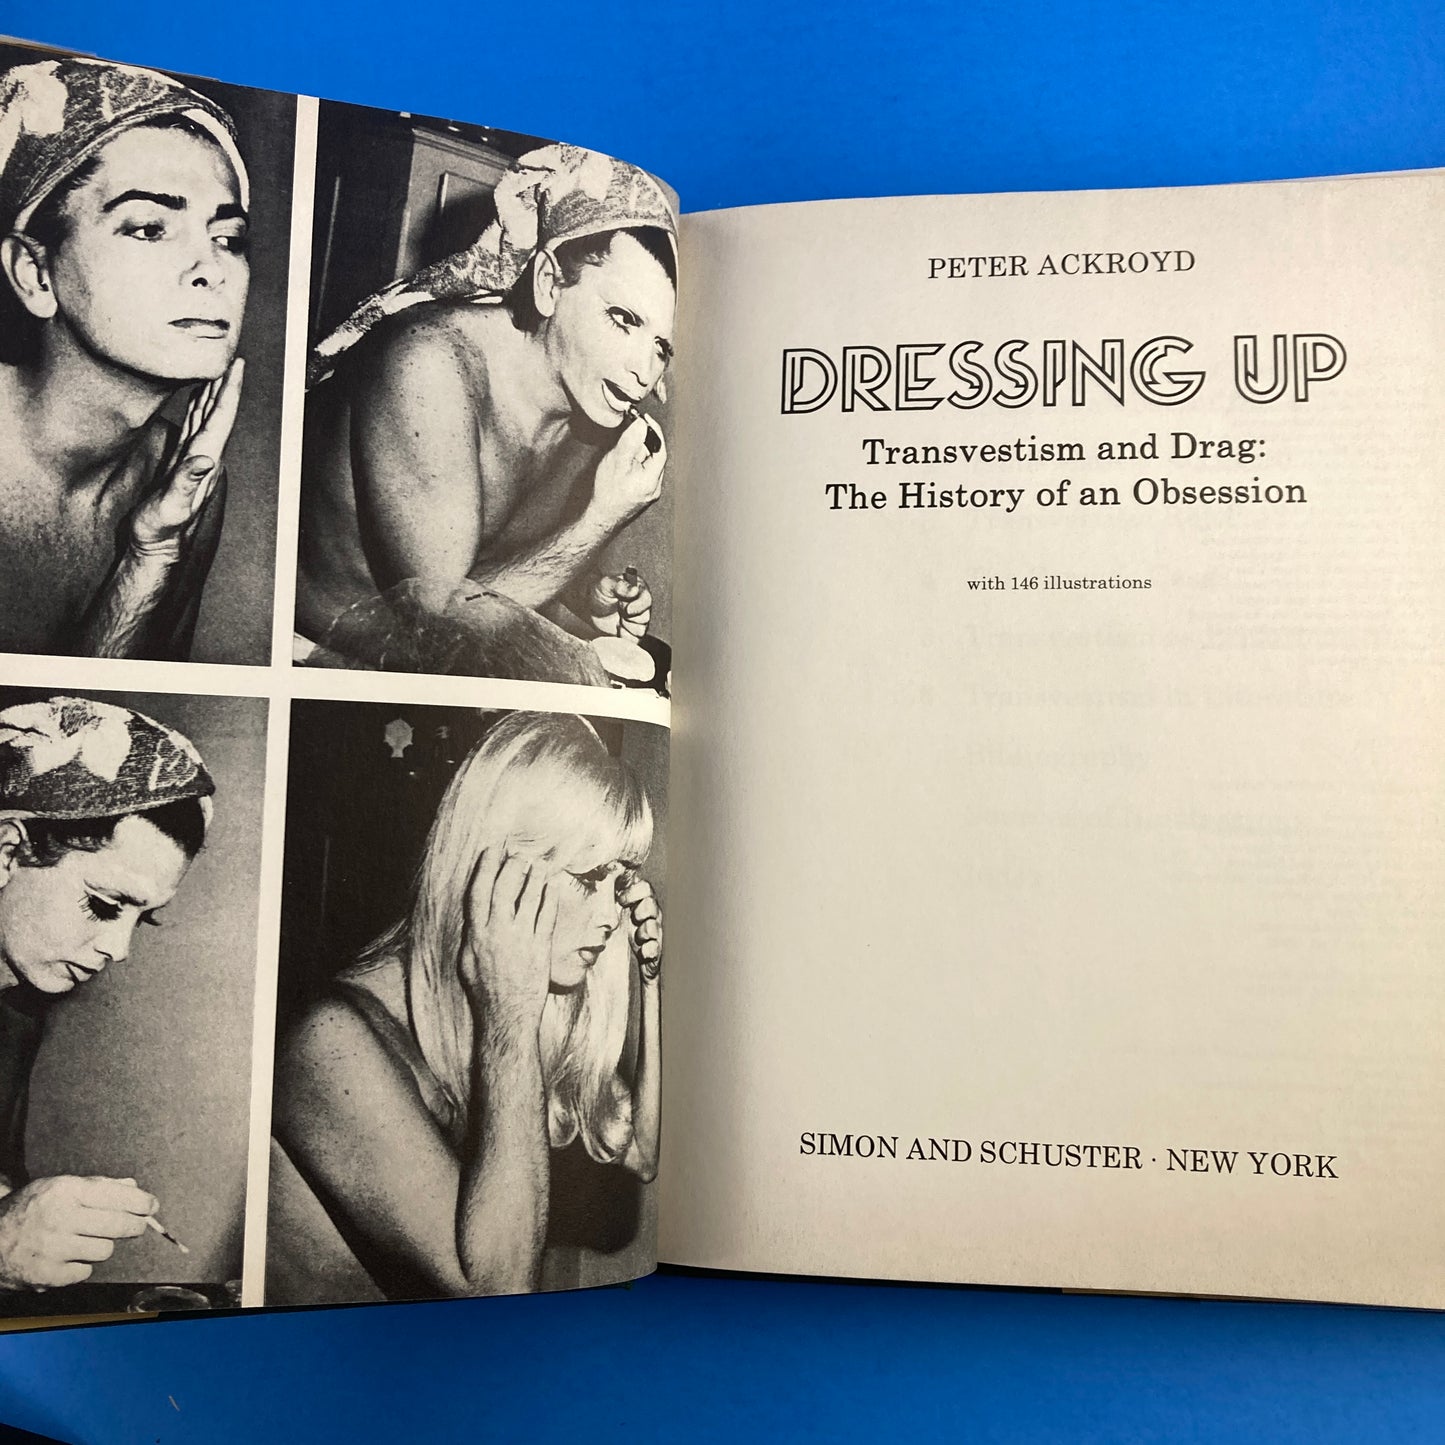 Dressing Up: Transvestism and Drag The History of an Obsession